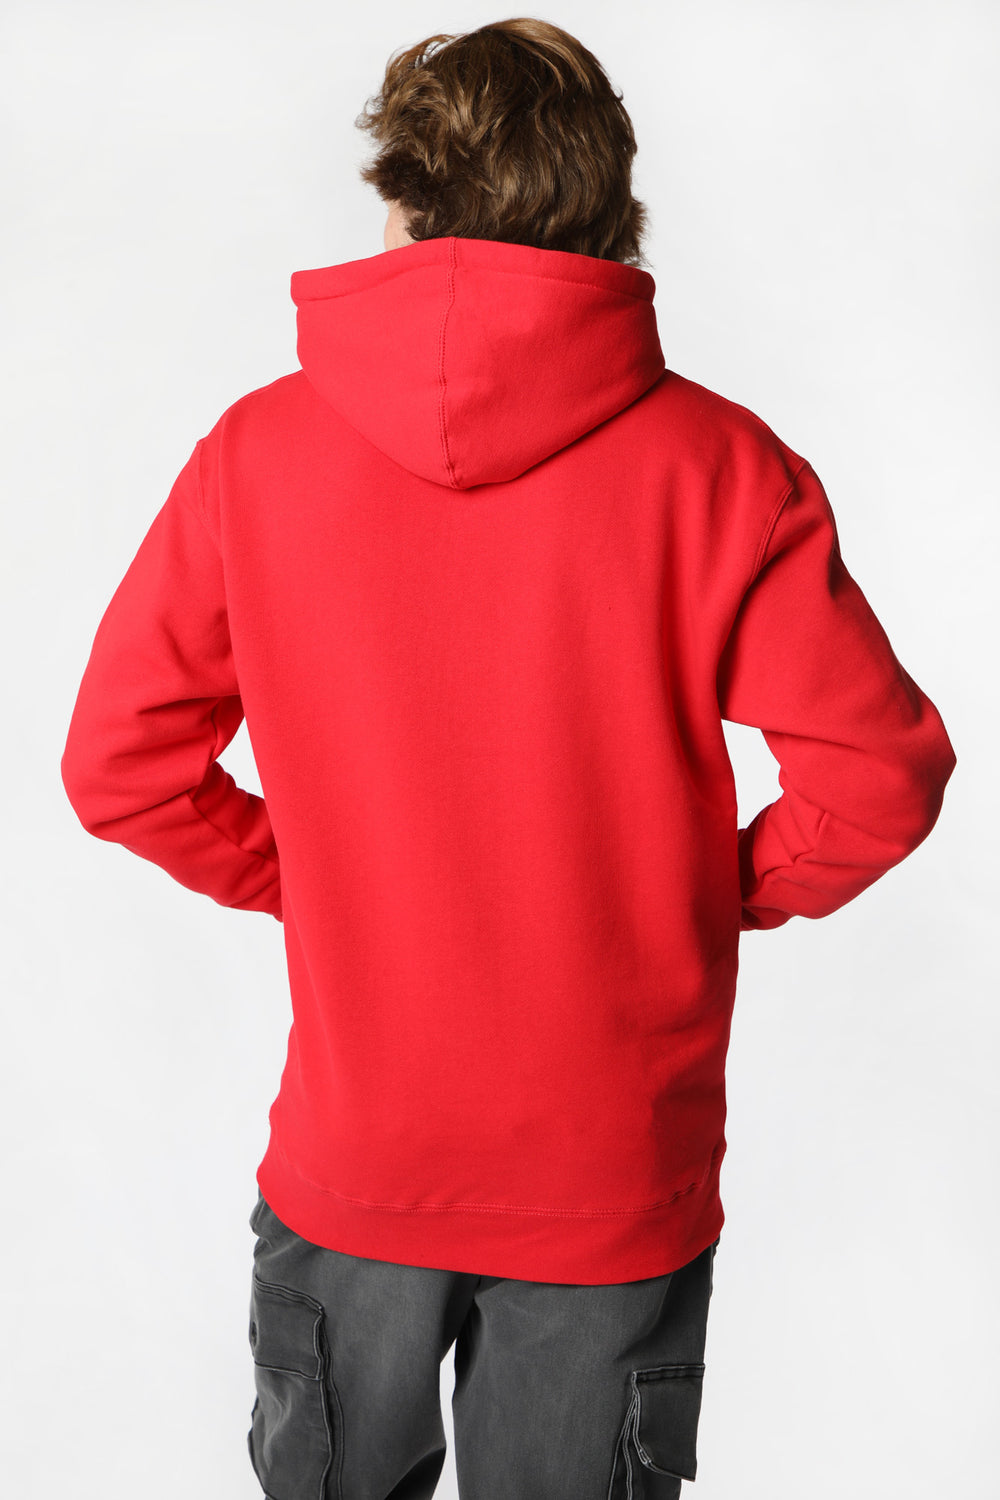 Independent Bar Logo Hoodie Red